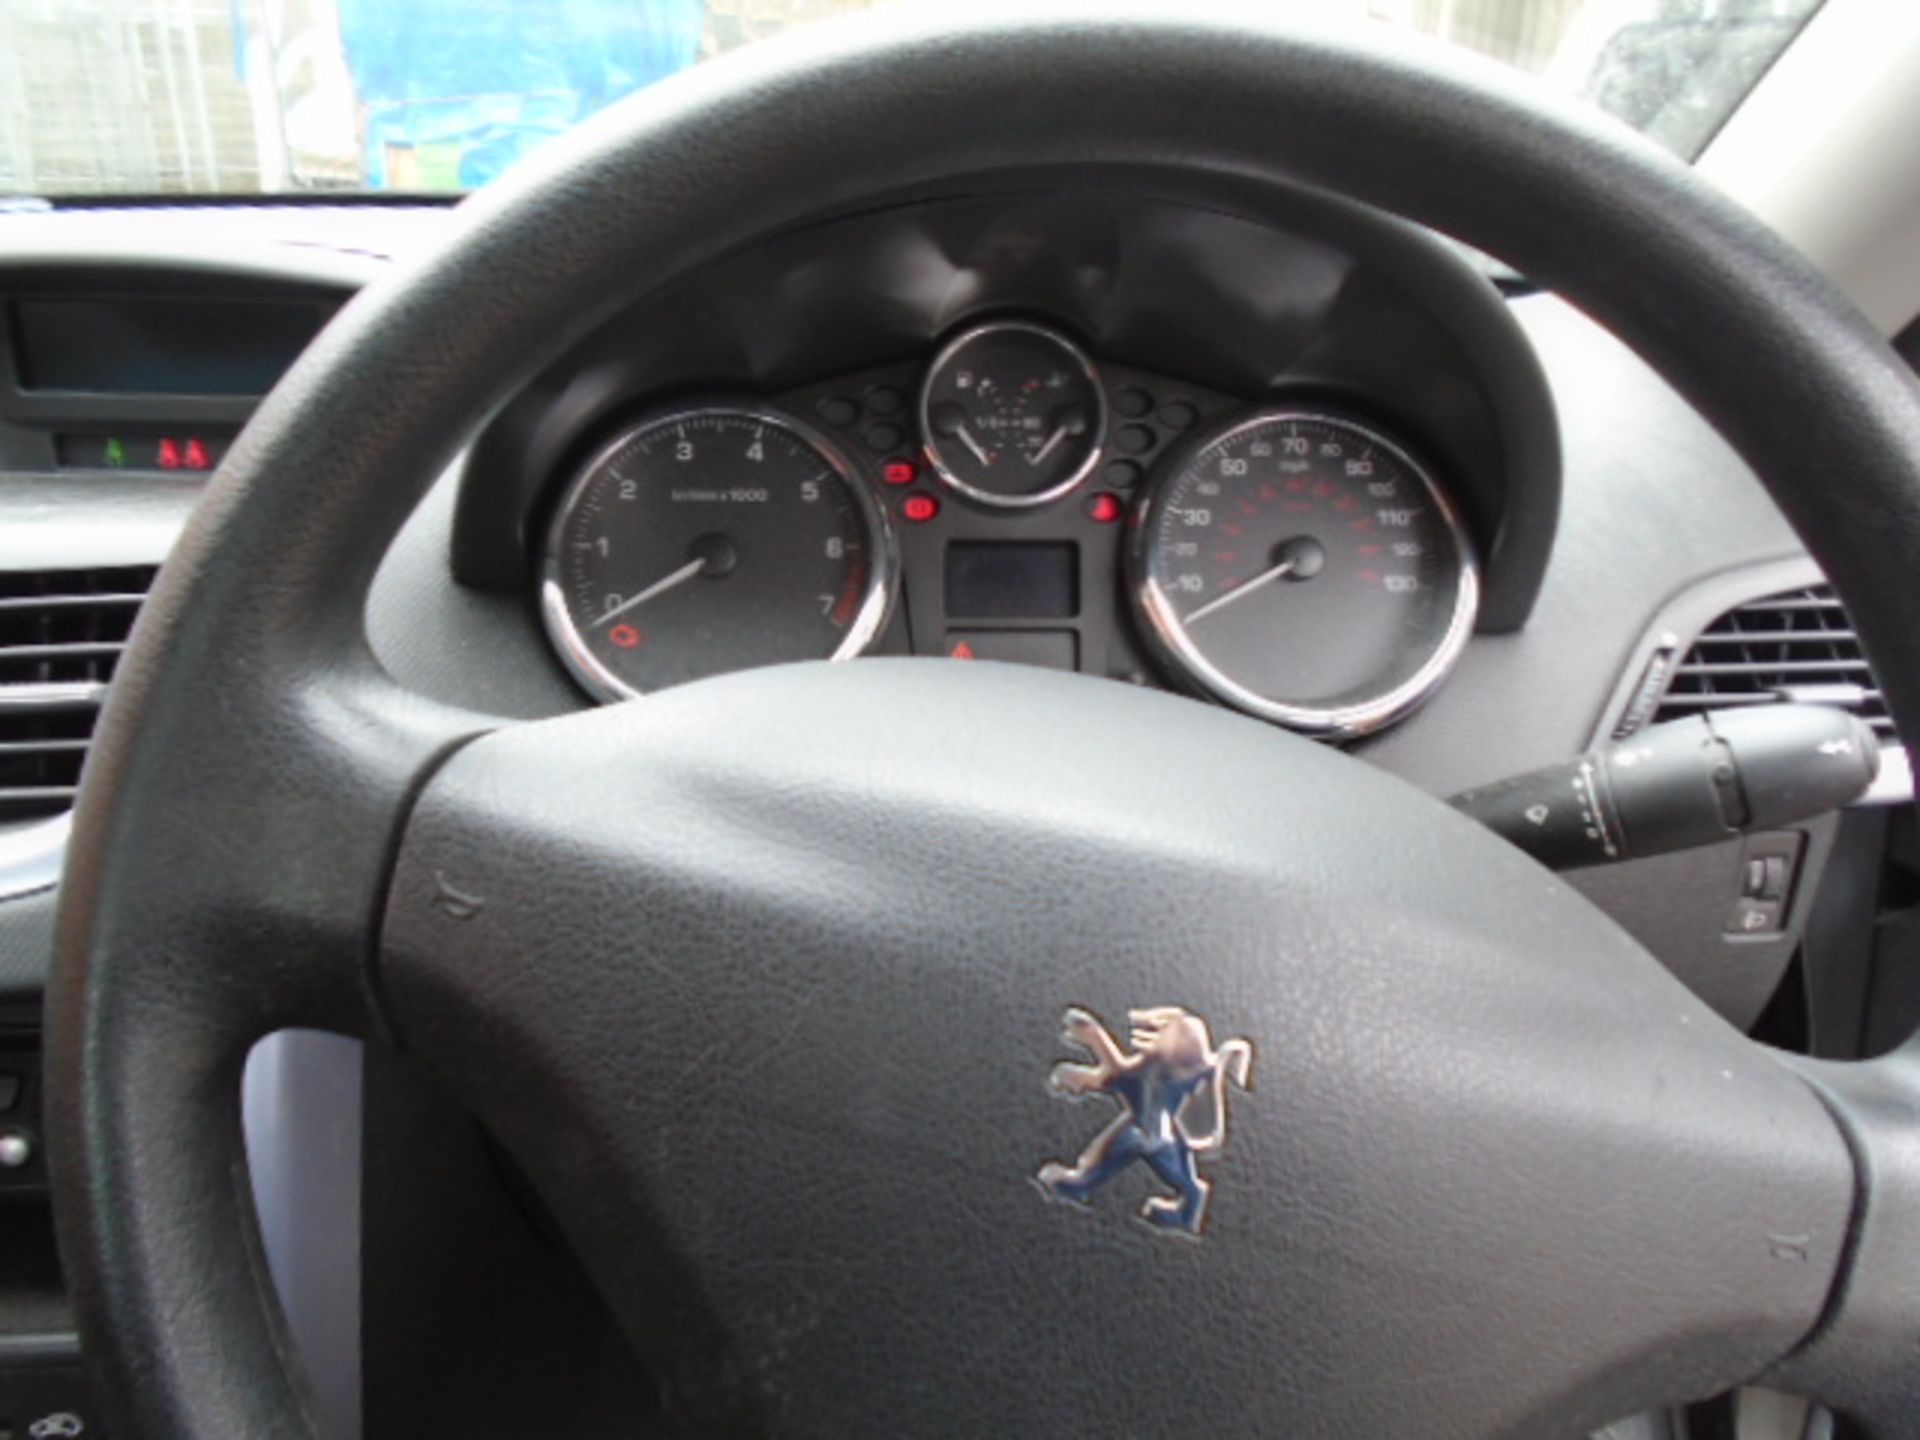 2007 Peugeot 207 sport CC Coupe 1598CC. AJ57 HLF. From a deceased estate, M.O.T expired July 2023, - Image 12 of 13